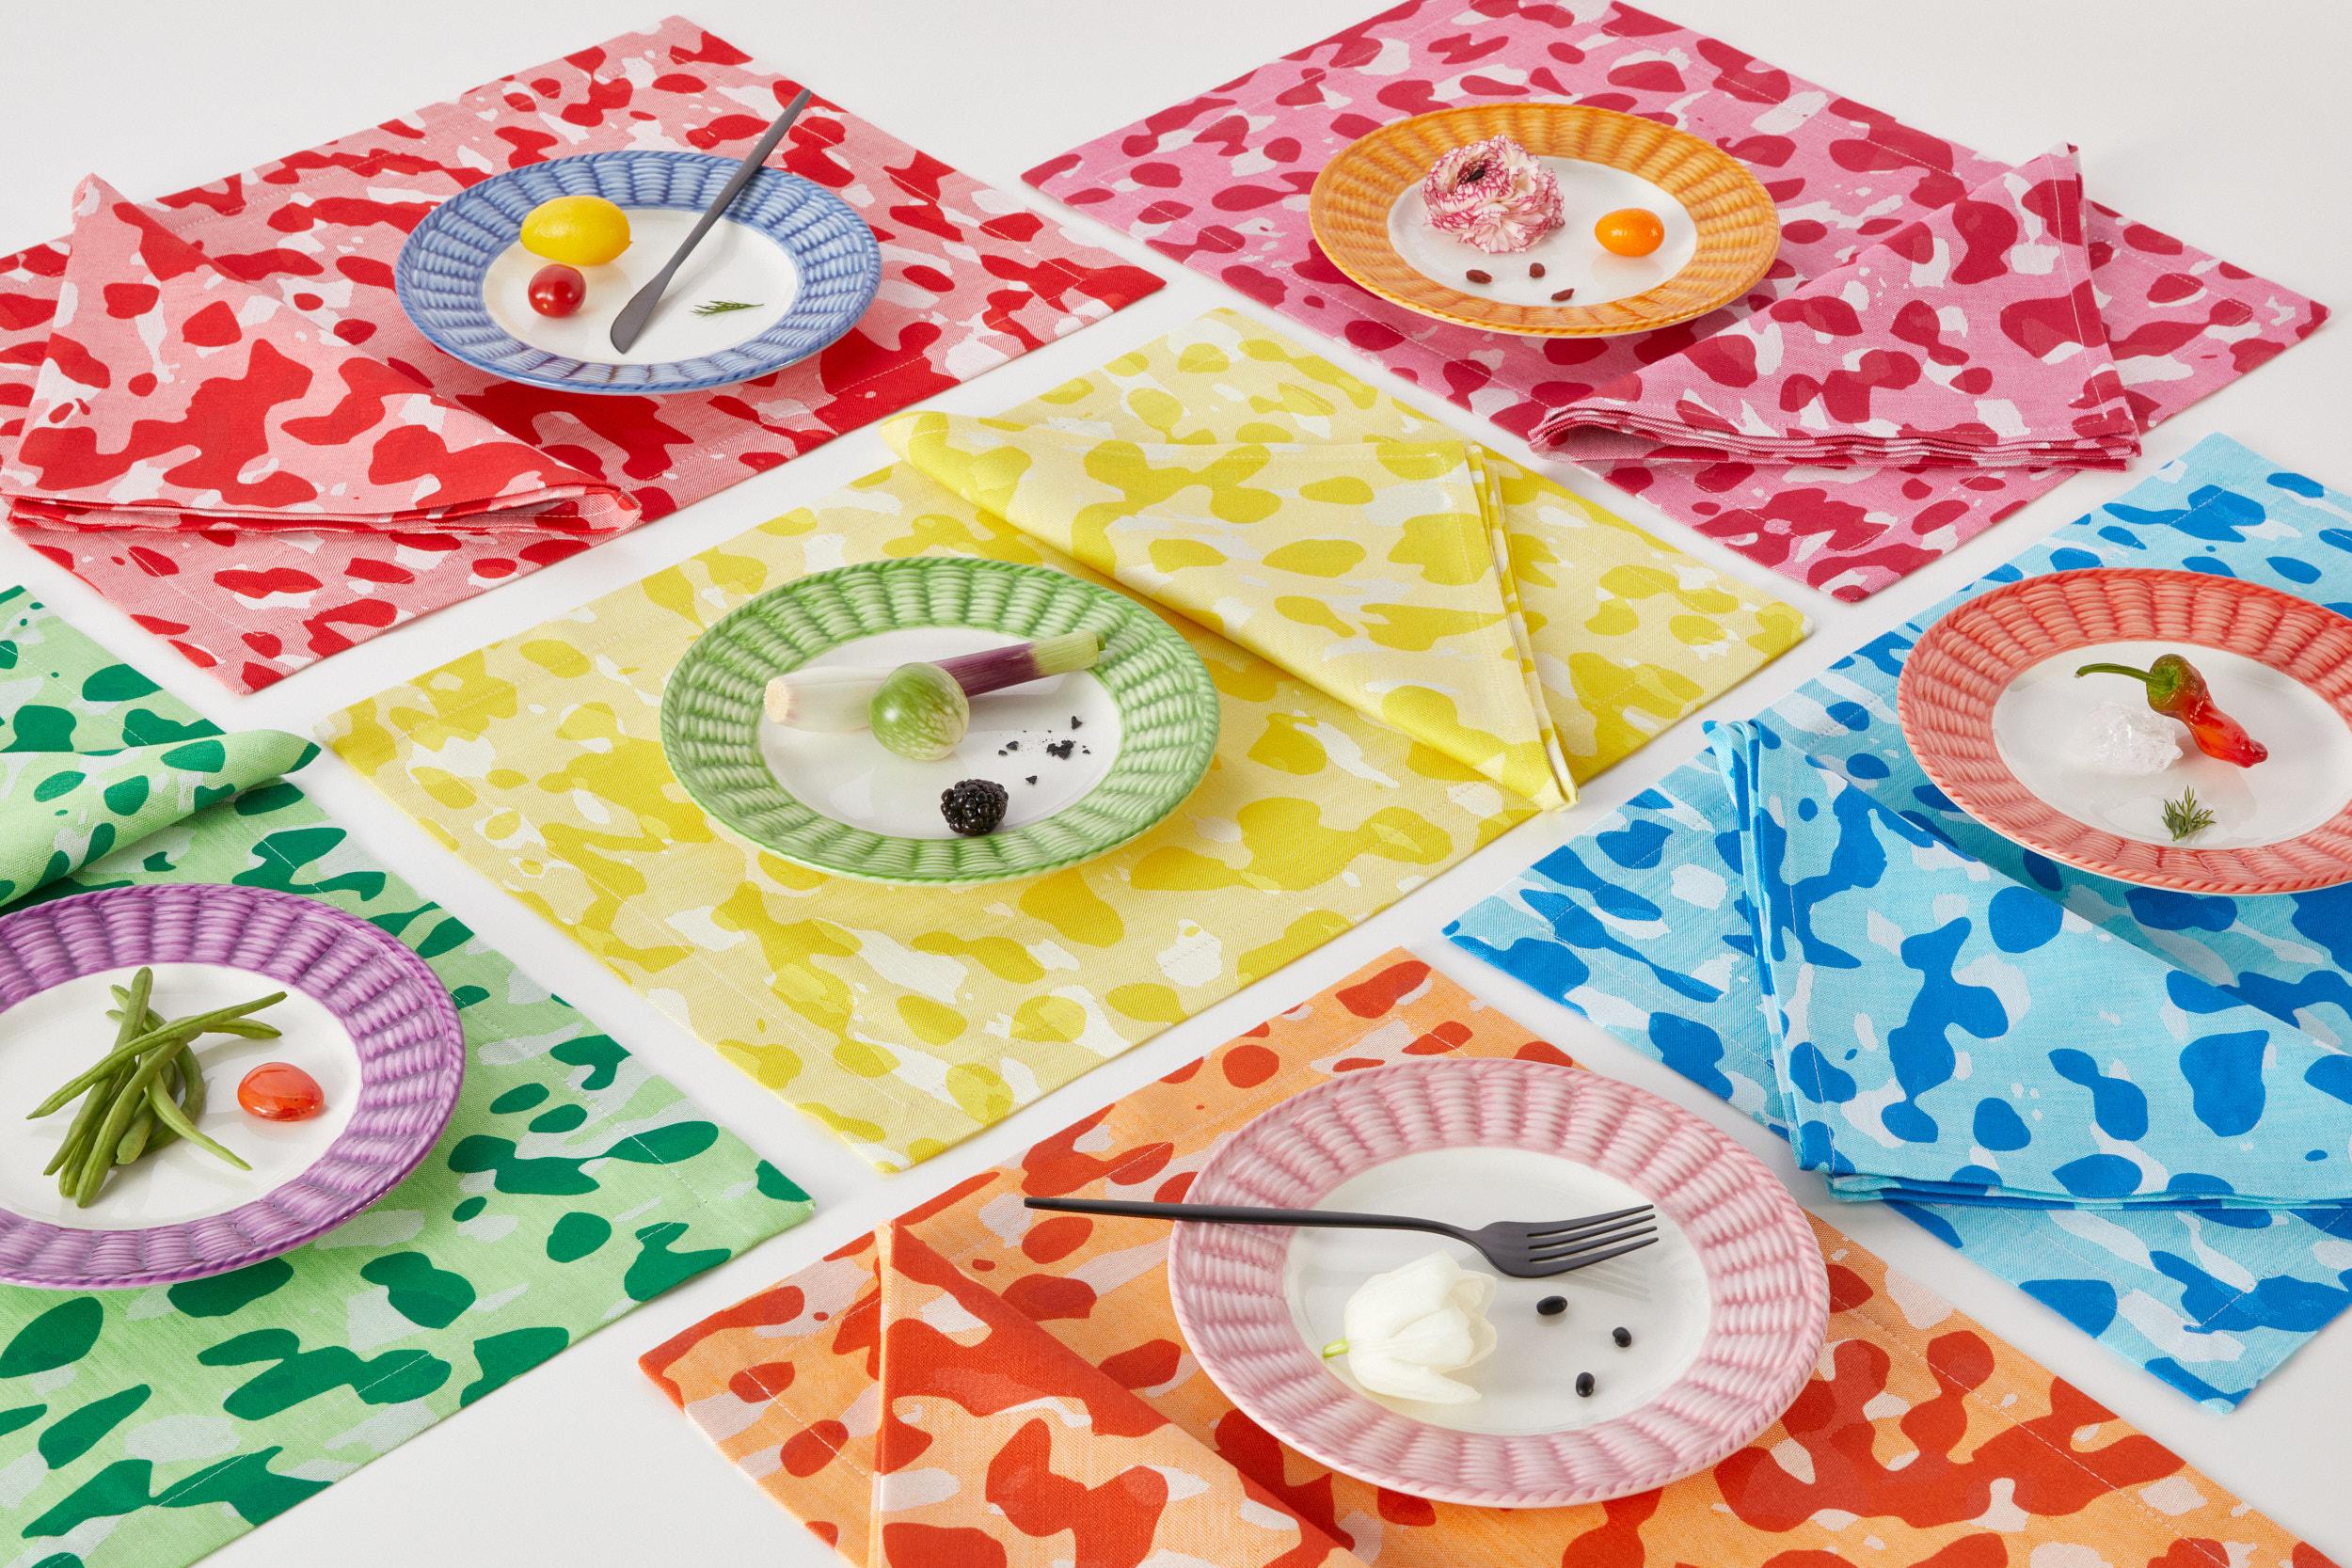 Our new textile collection is a feast for mix&match lovers who delight in creating unique table settings. With a vibrant palette of nine different colors, you can playfully overlap tablecloths, runners, placemats, napkins and coasters to express